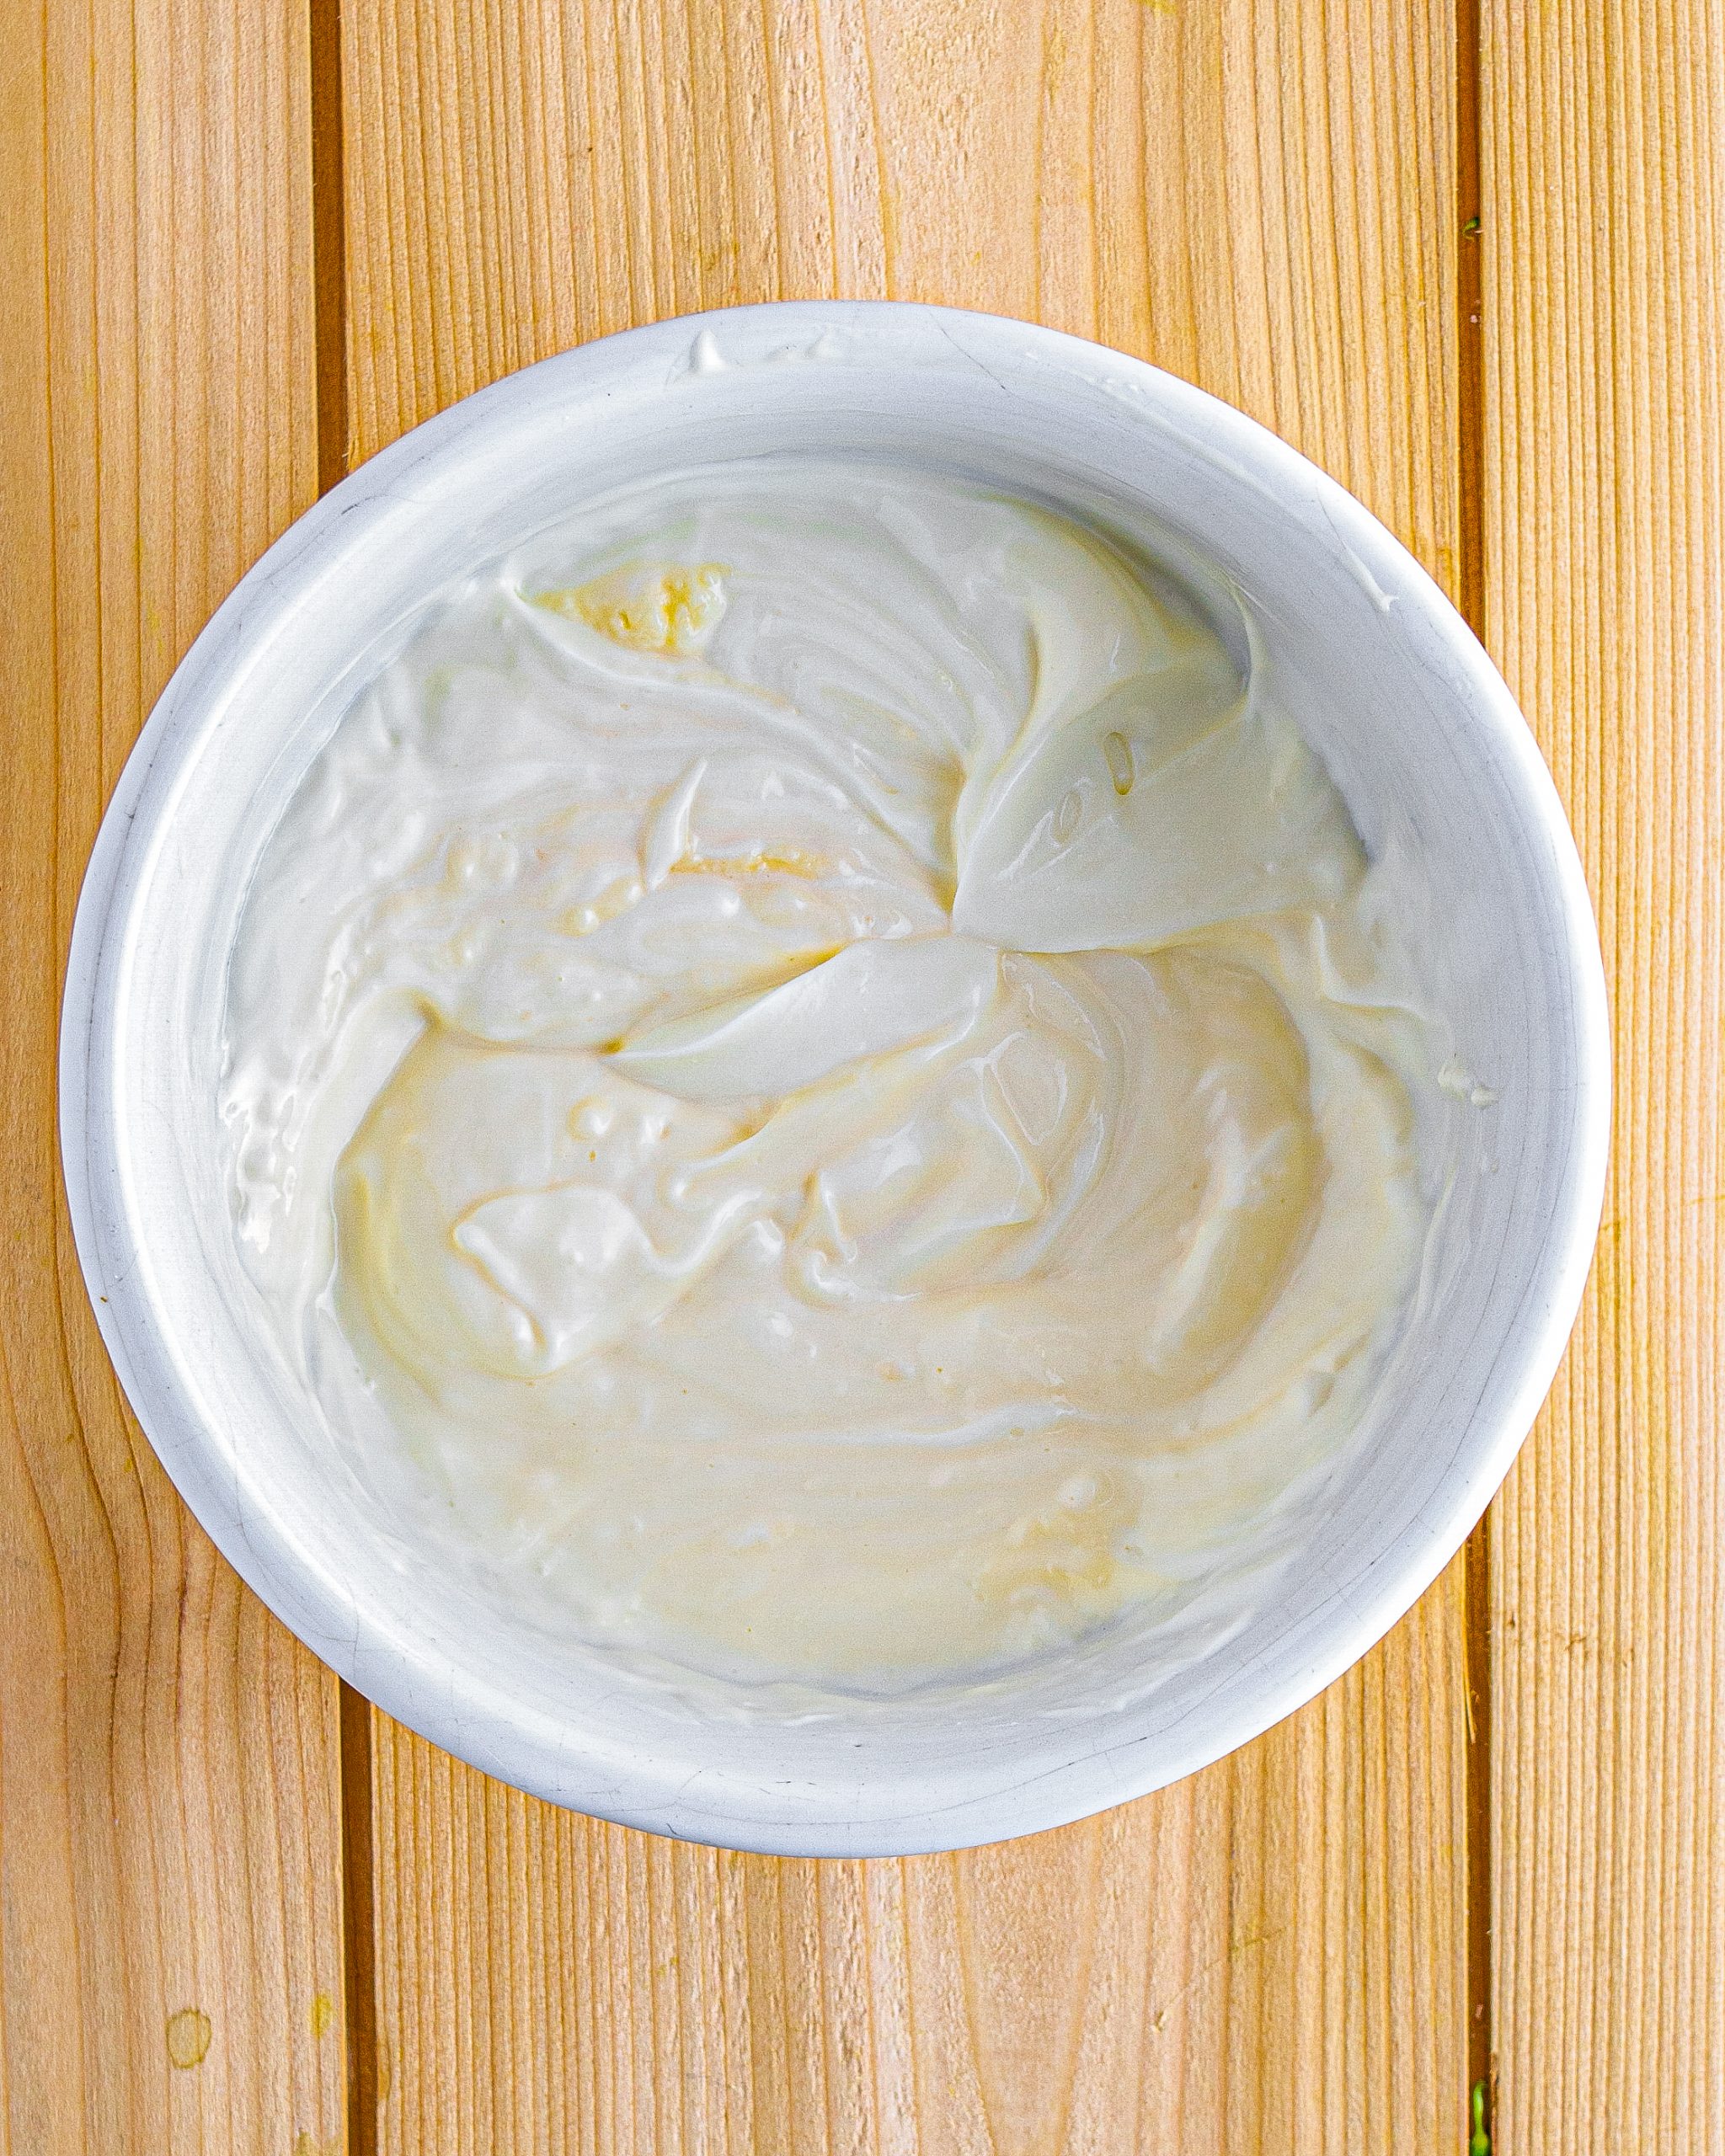 Stir the mayonnaise mixture into the large serving bowl, and stir to combine the ingredients well. 